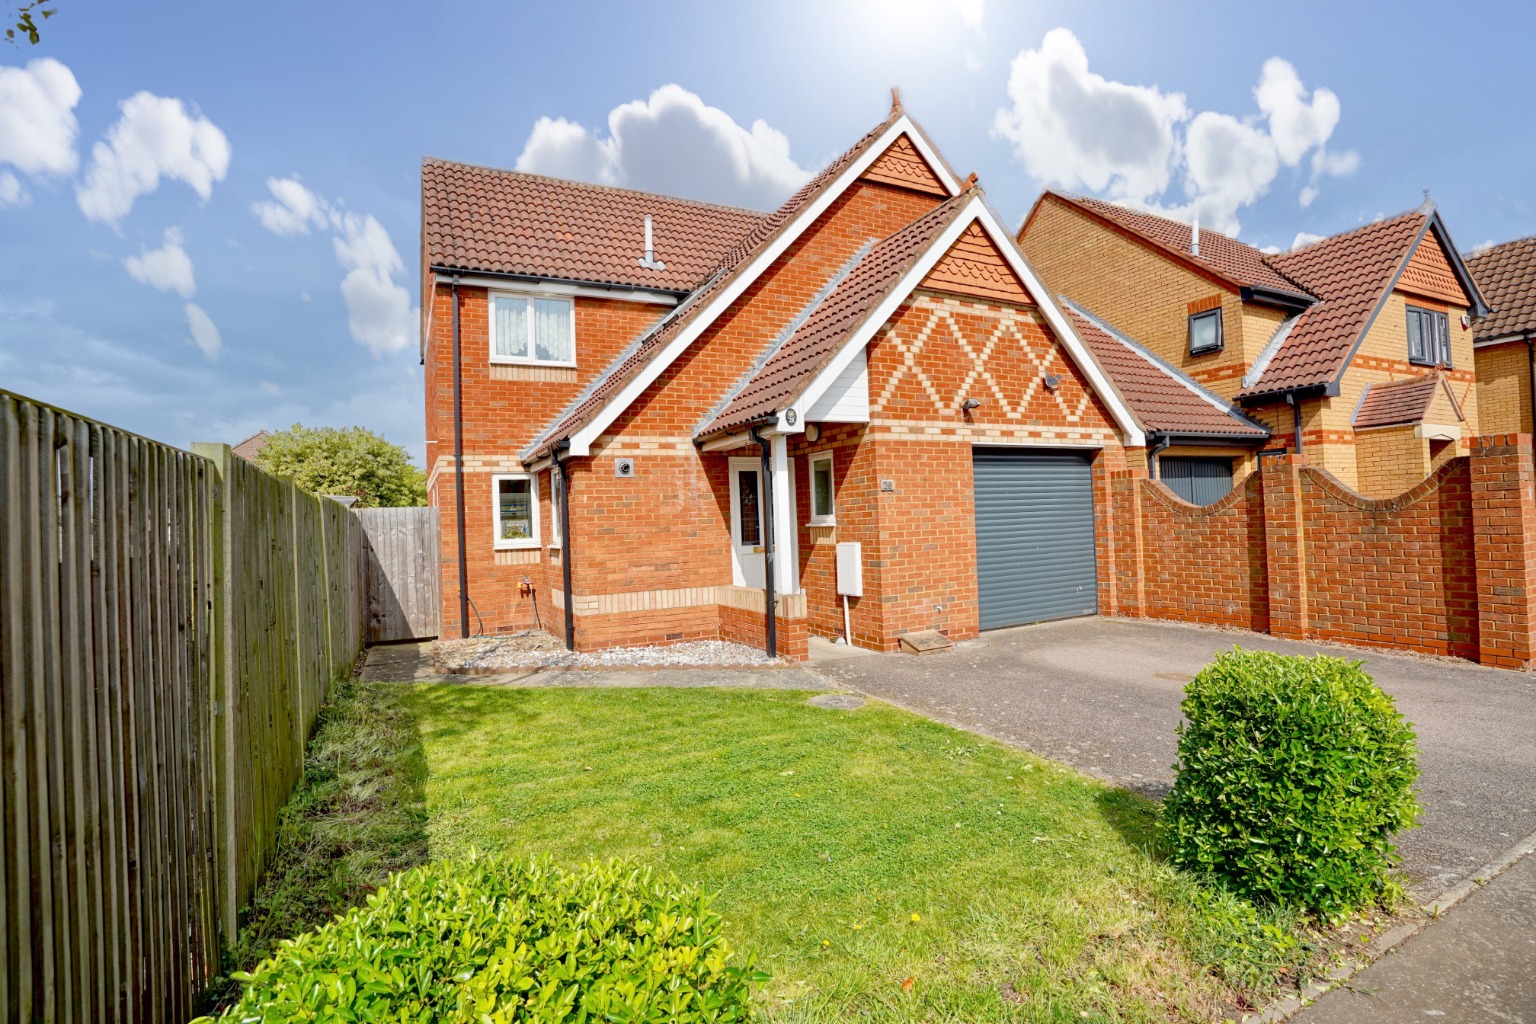 4 bed detached house for sale in Swallow Court, St. Neots, PE19